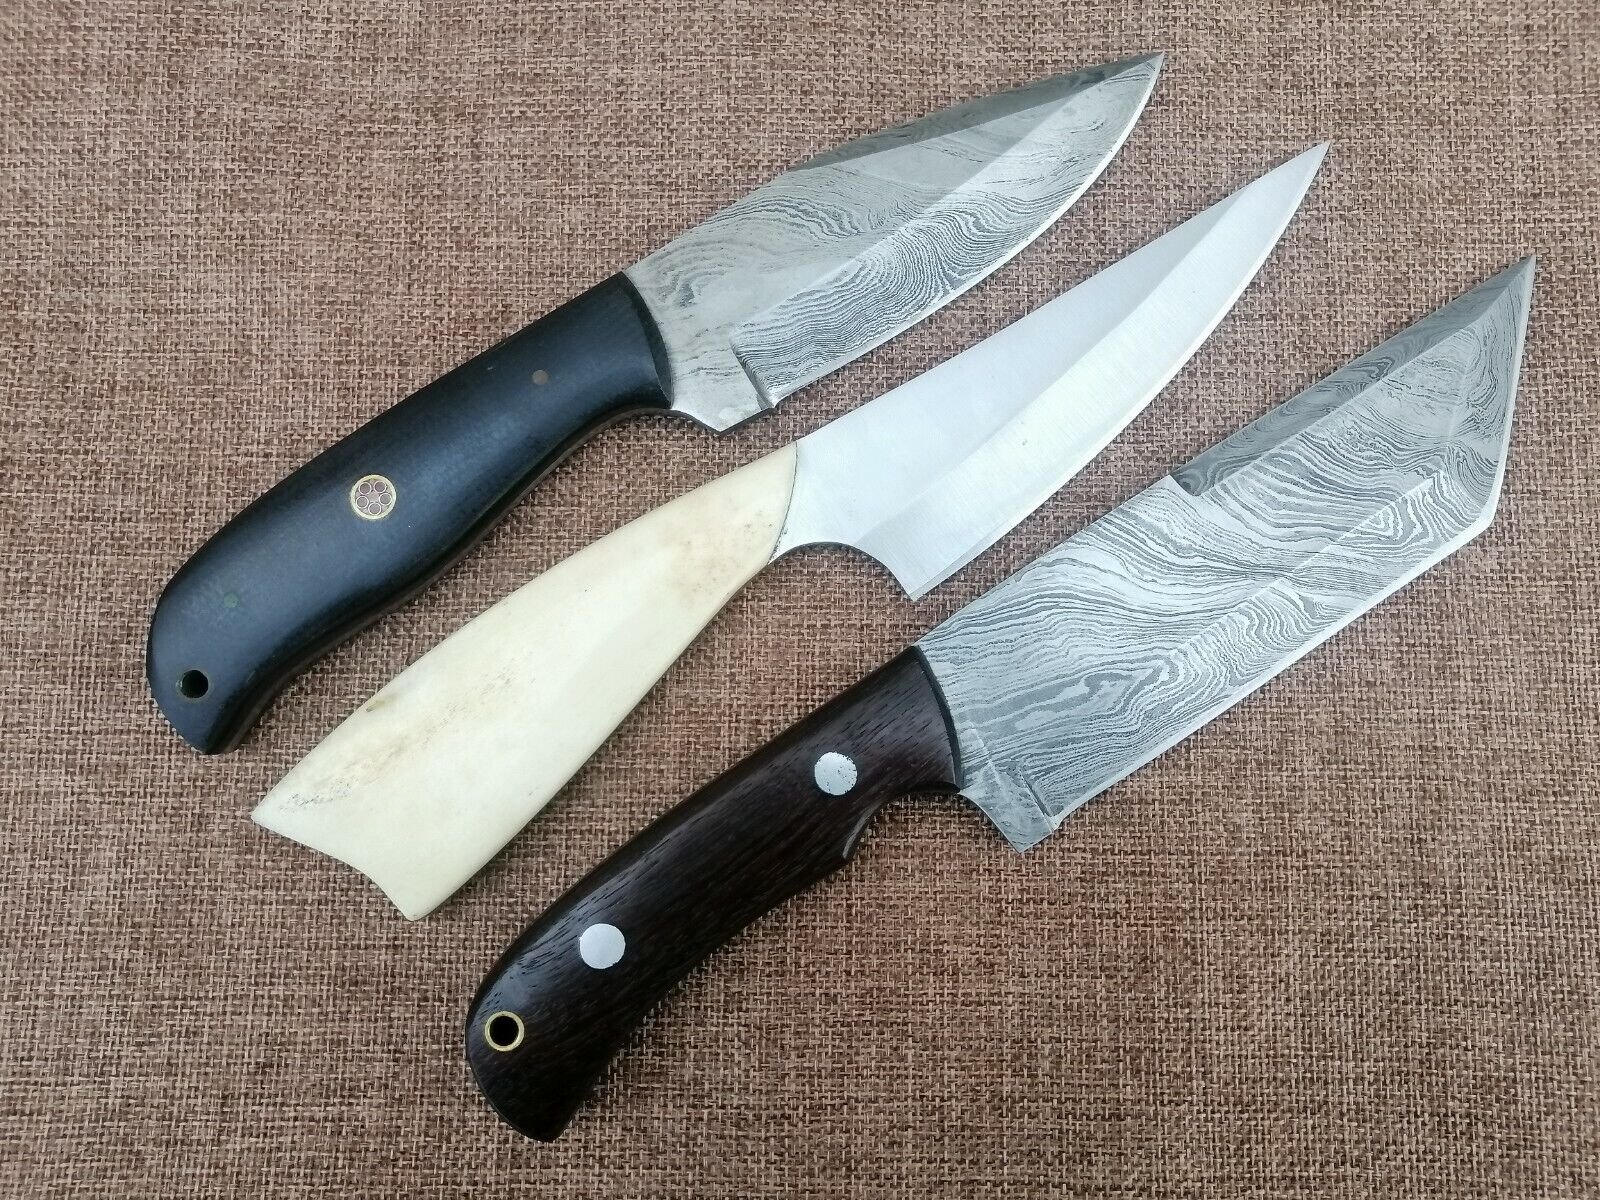 LOT of 3 unique Full Tang custom Hand Forged Skinners with Leather Sheaths